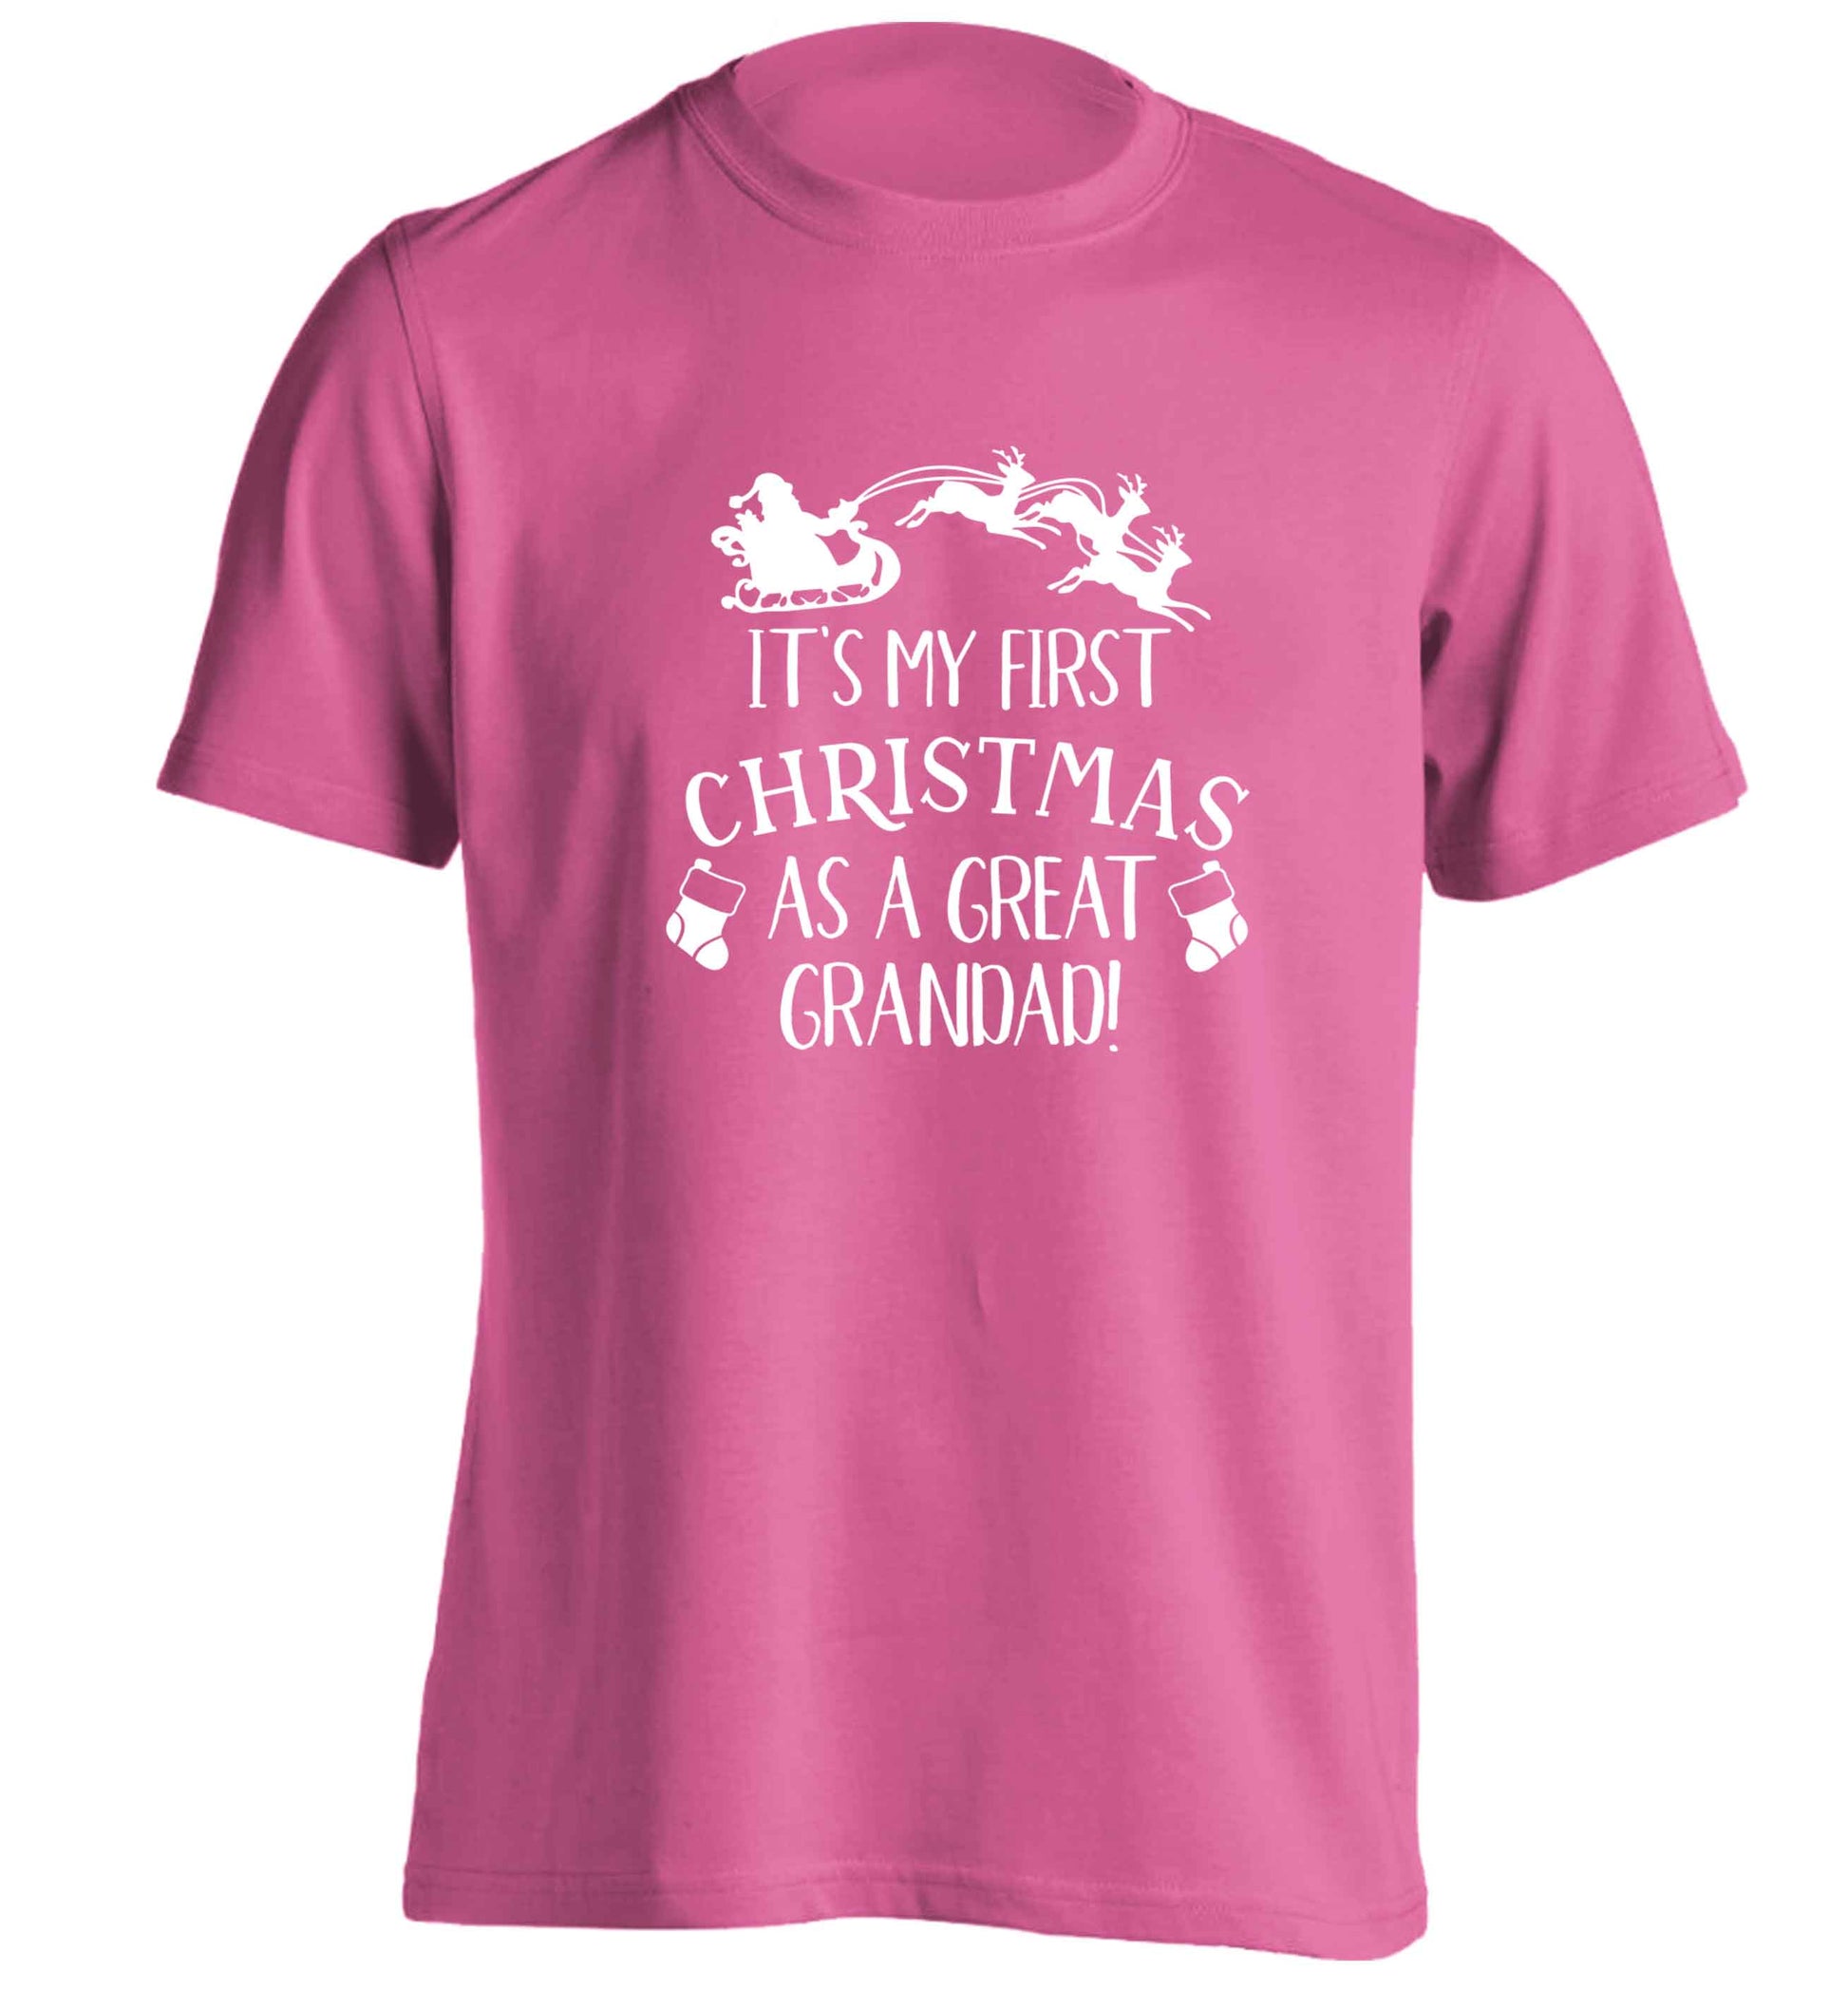 It's my first Christmas as a great grandad! adults unisex pink Tshirt 2XL